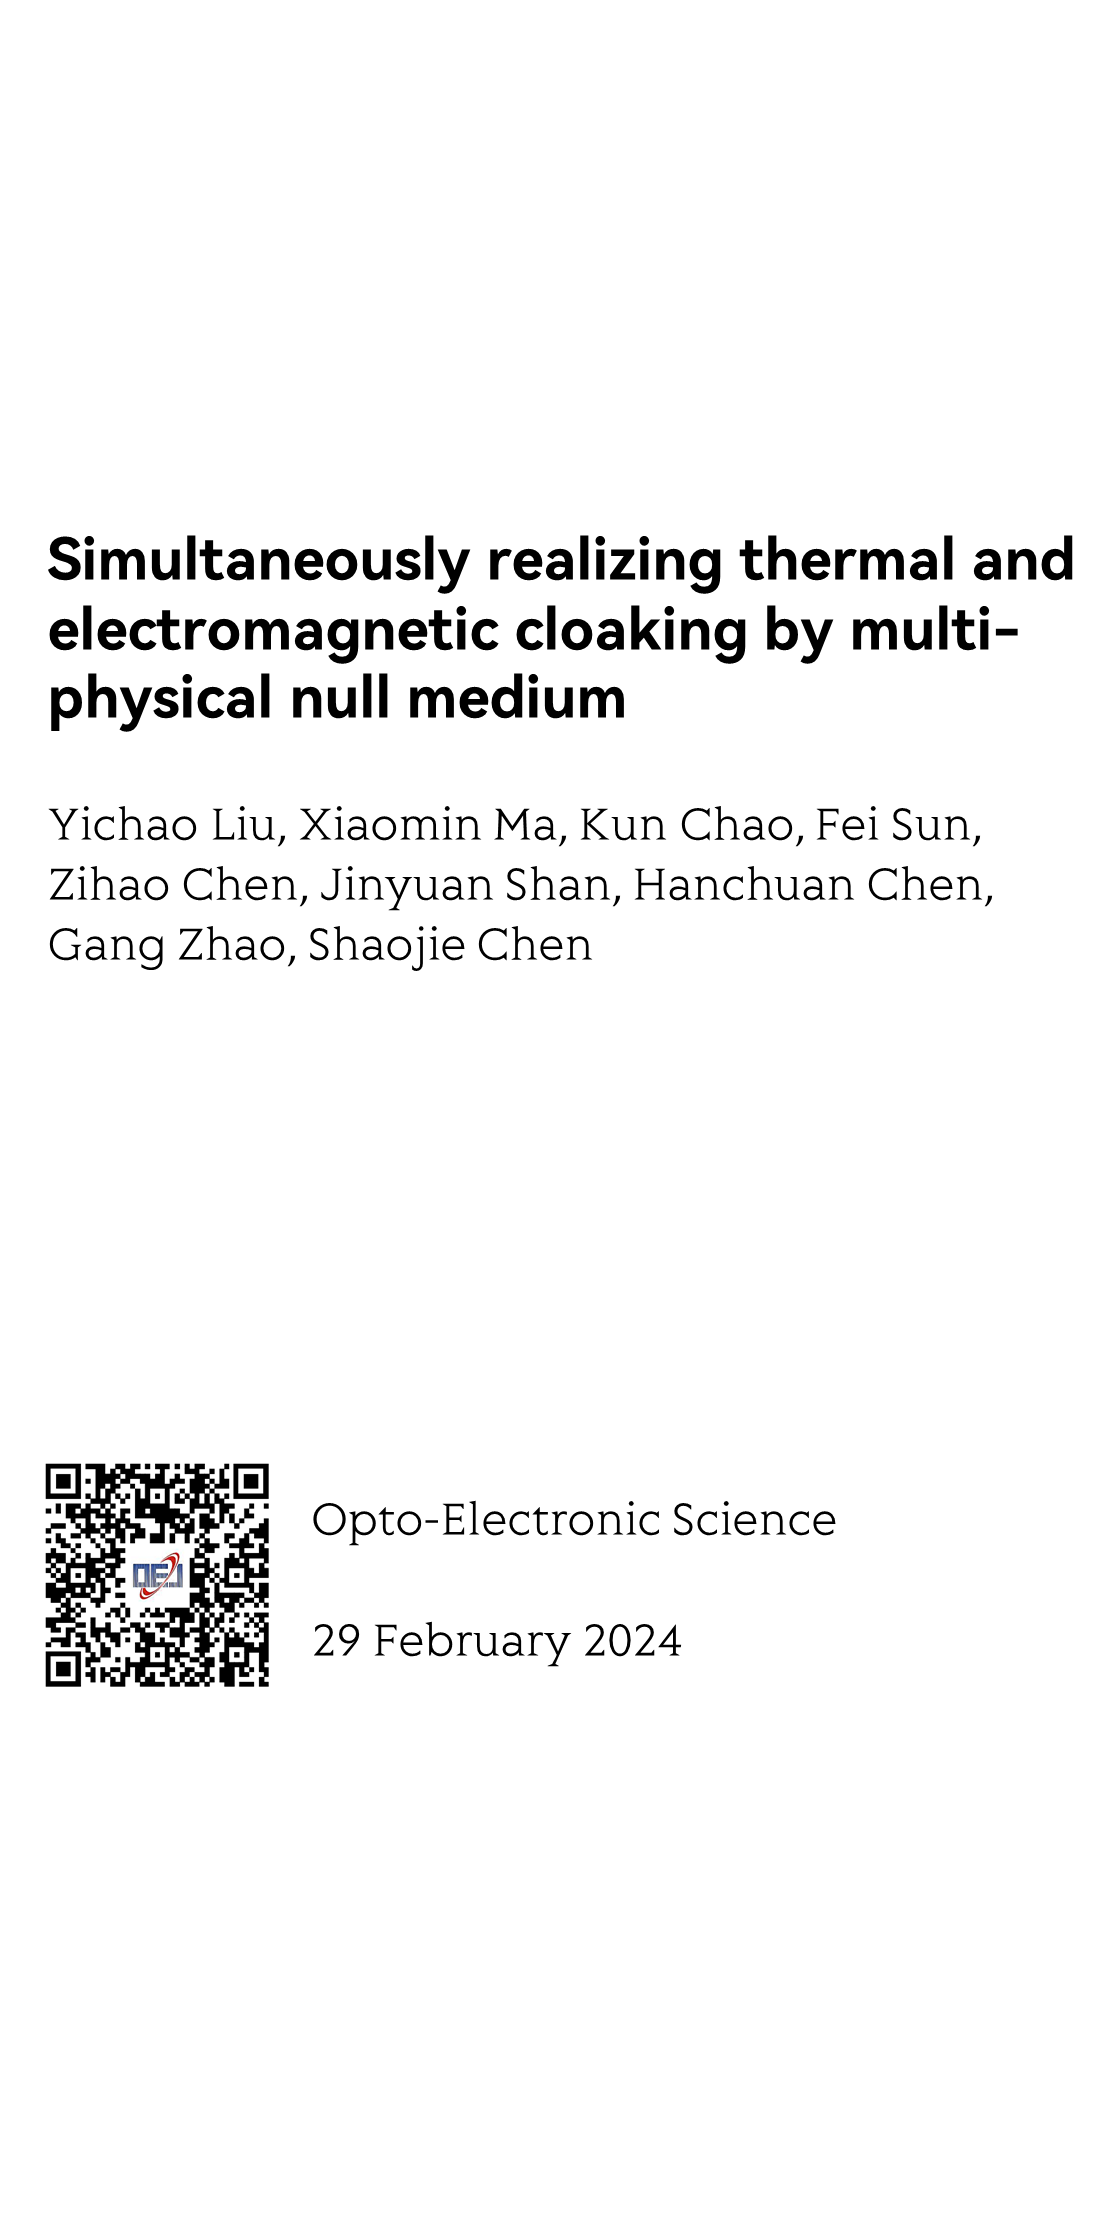 Simultaneously realizing thermal and electromagnetic cloaking by multi-physical null medium_1